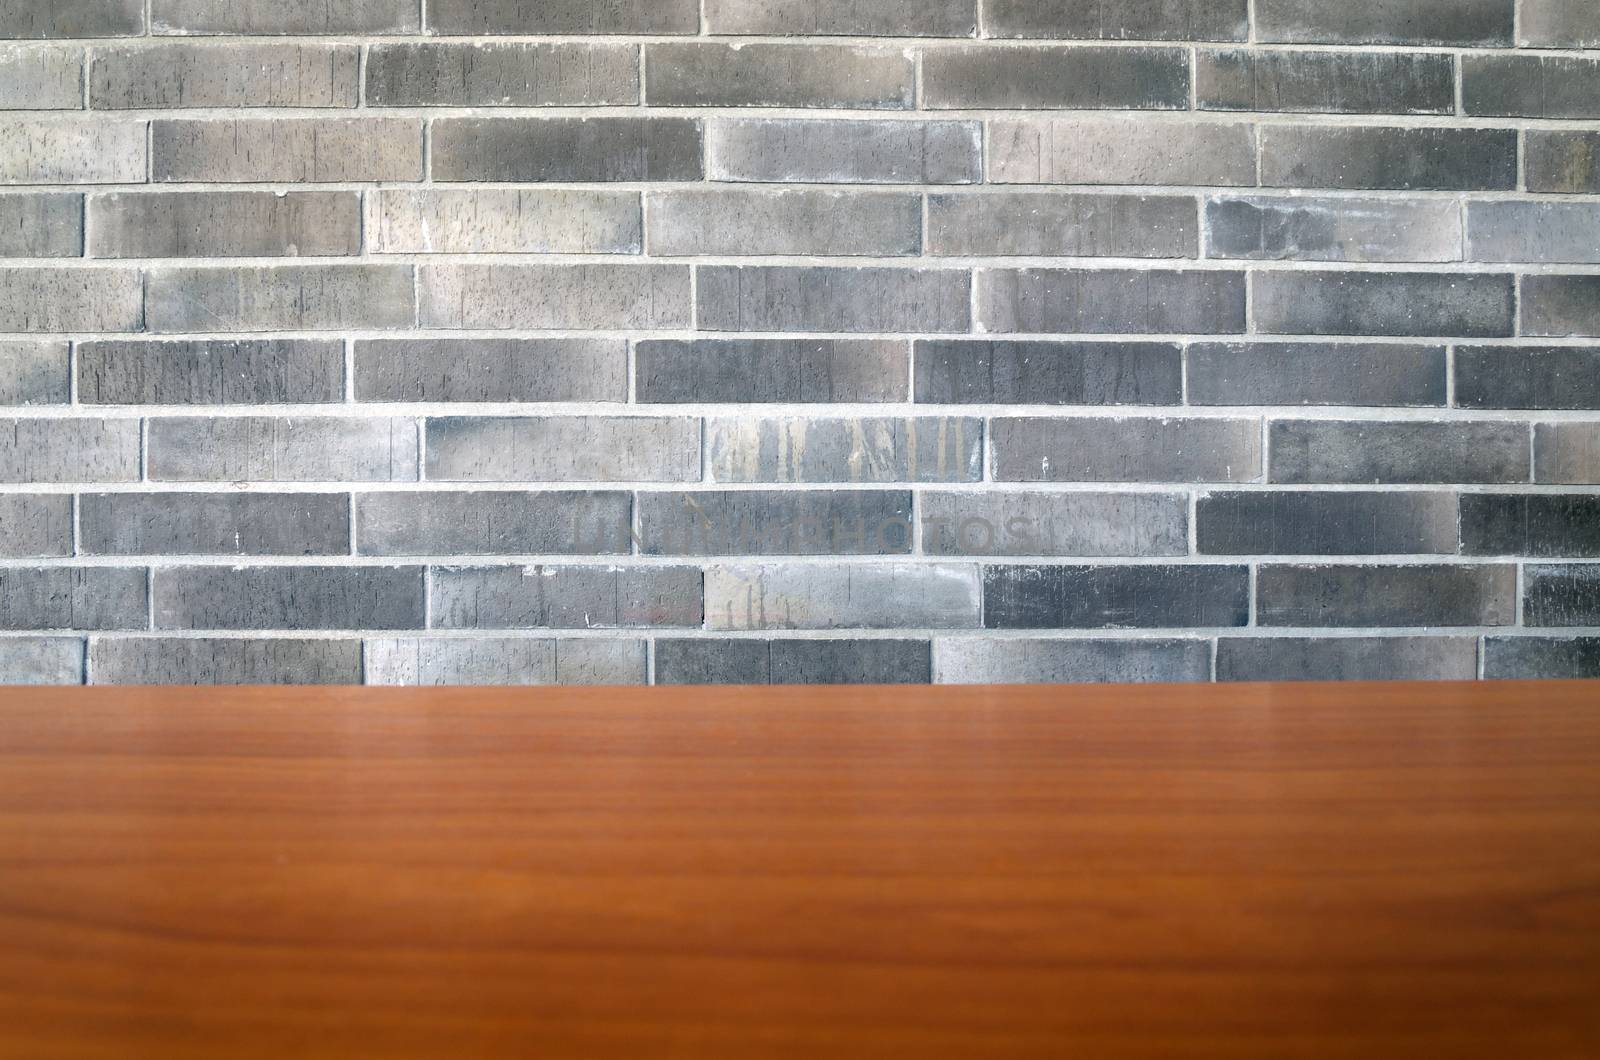 Brick wall texture with wood background. Focus at brick wall